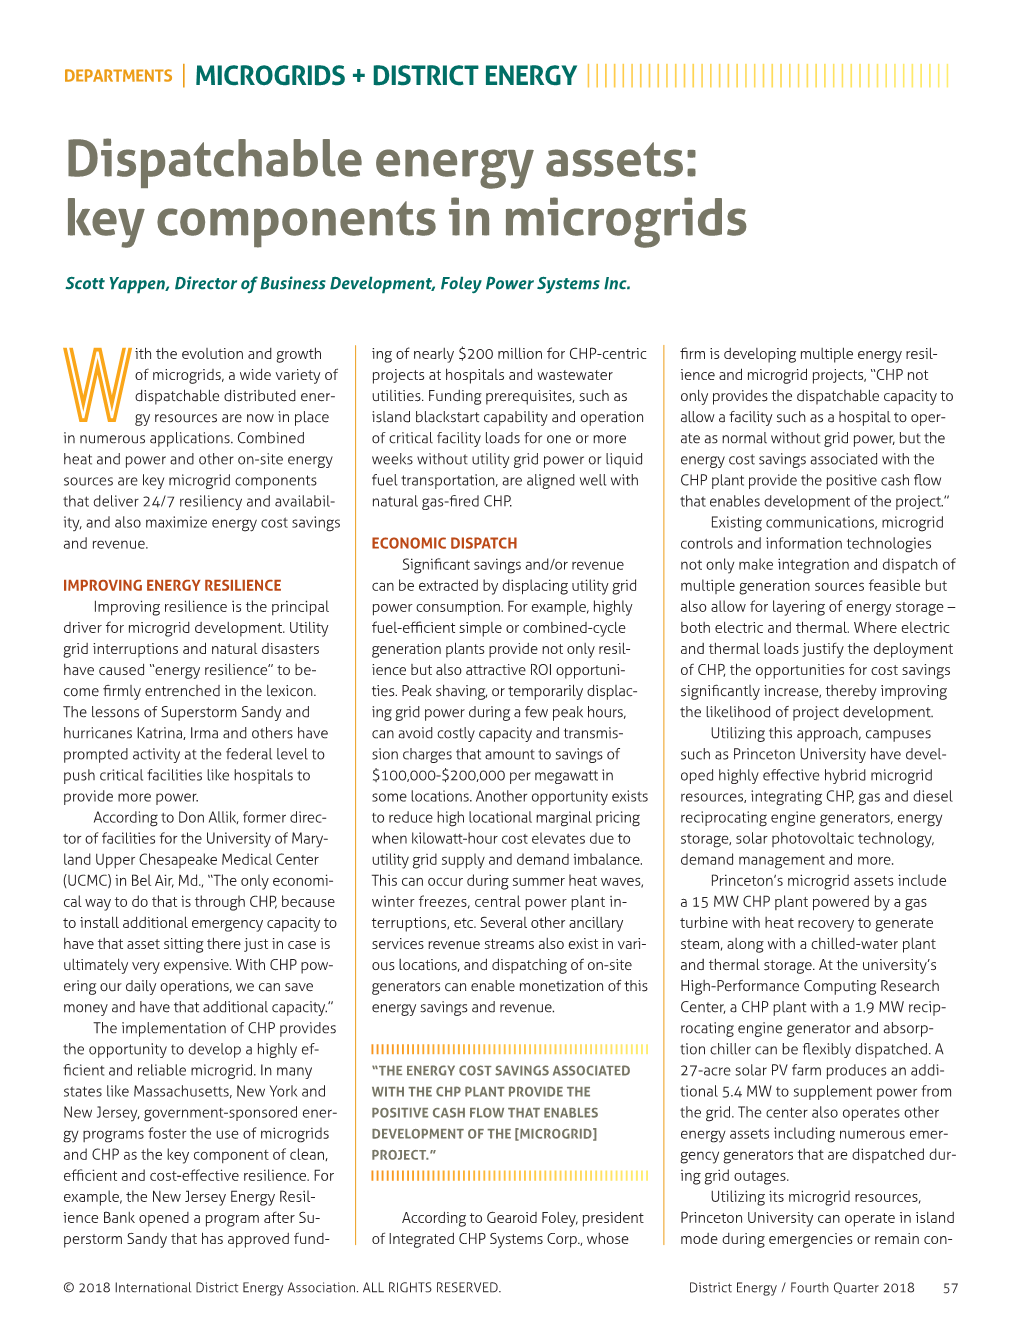 Dispatchable Energy Assets: Key Components in Microgrids